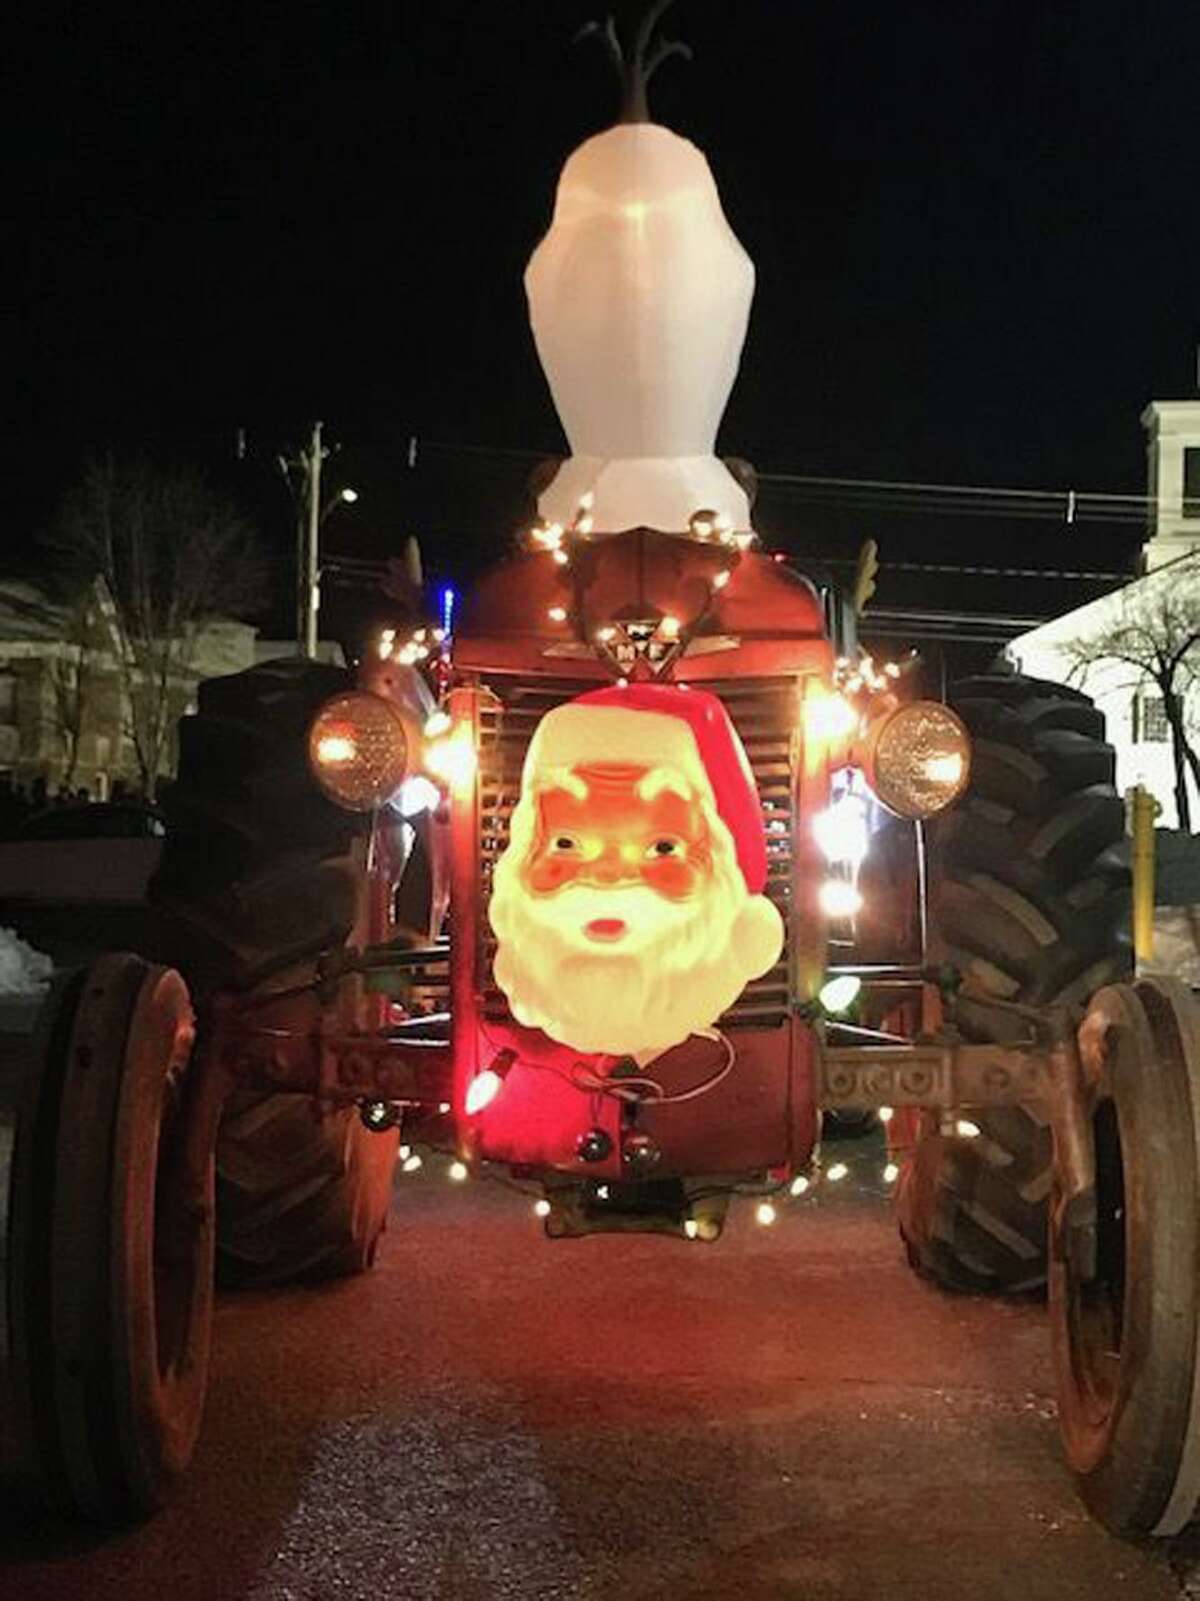 Tractor Santa in the Morris Christmas parade in 2019, which will be reprised in 2020.